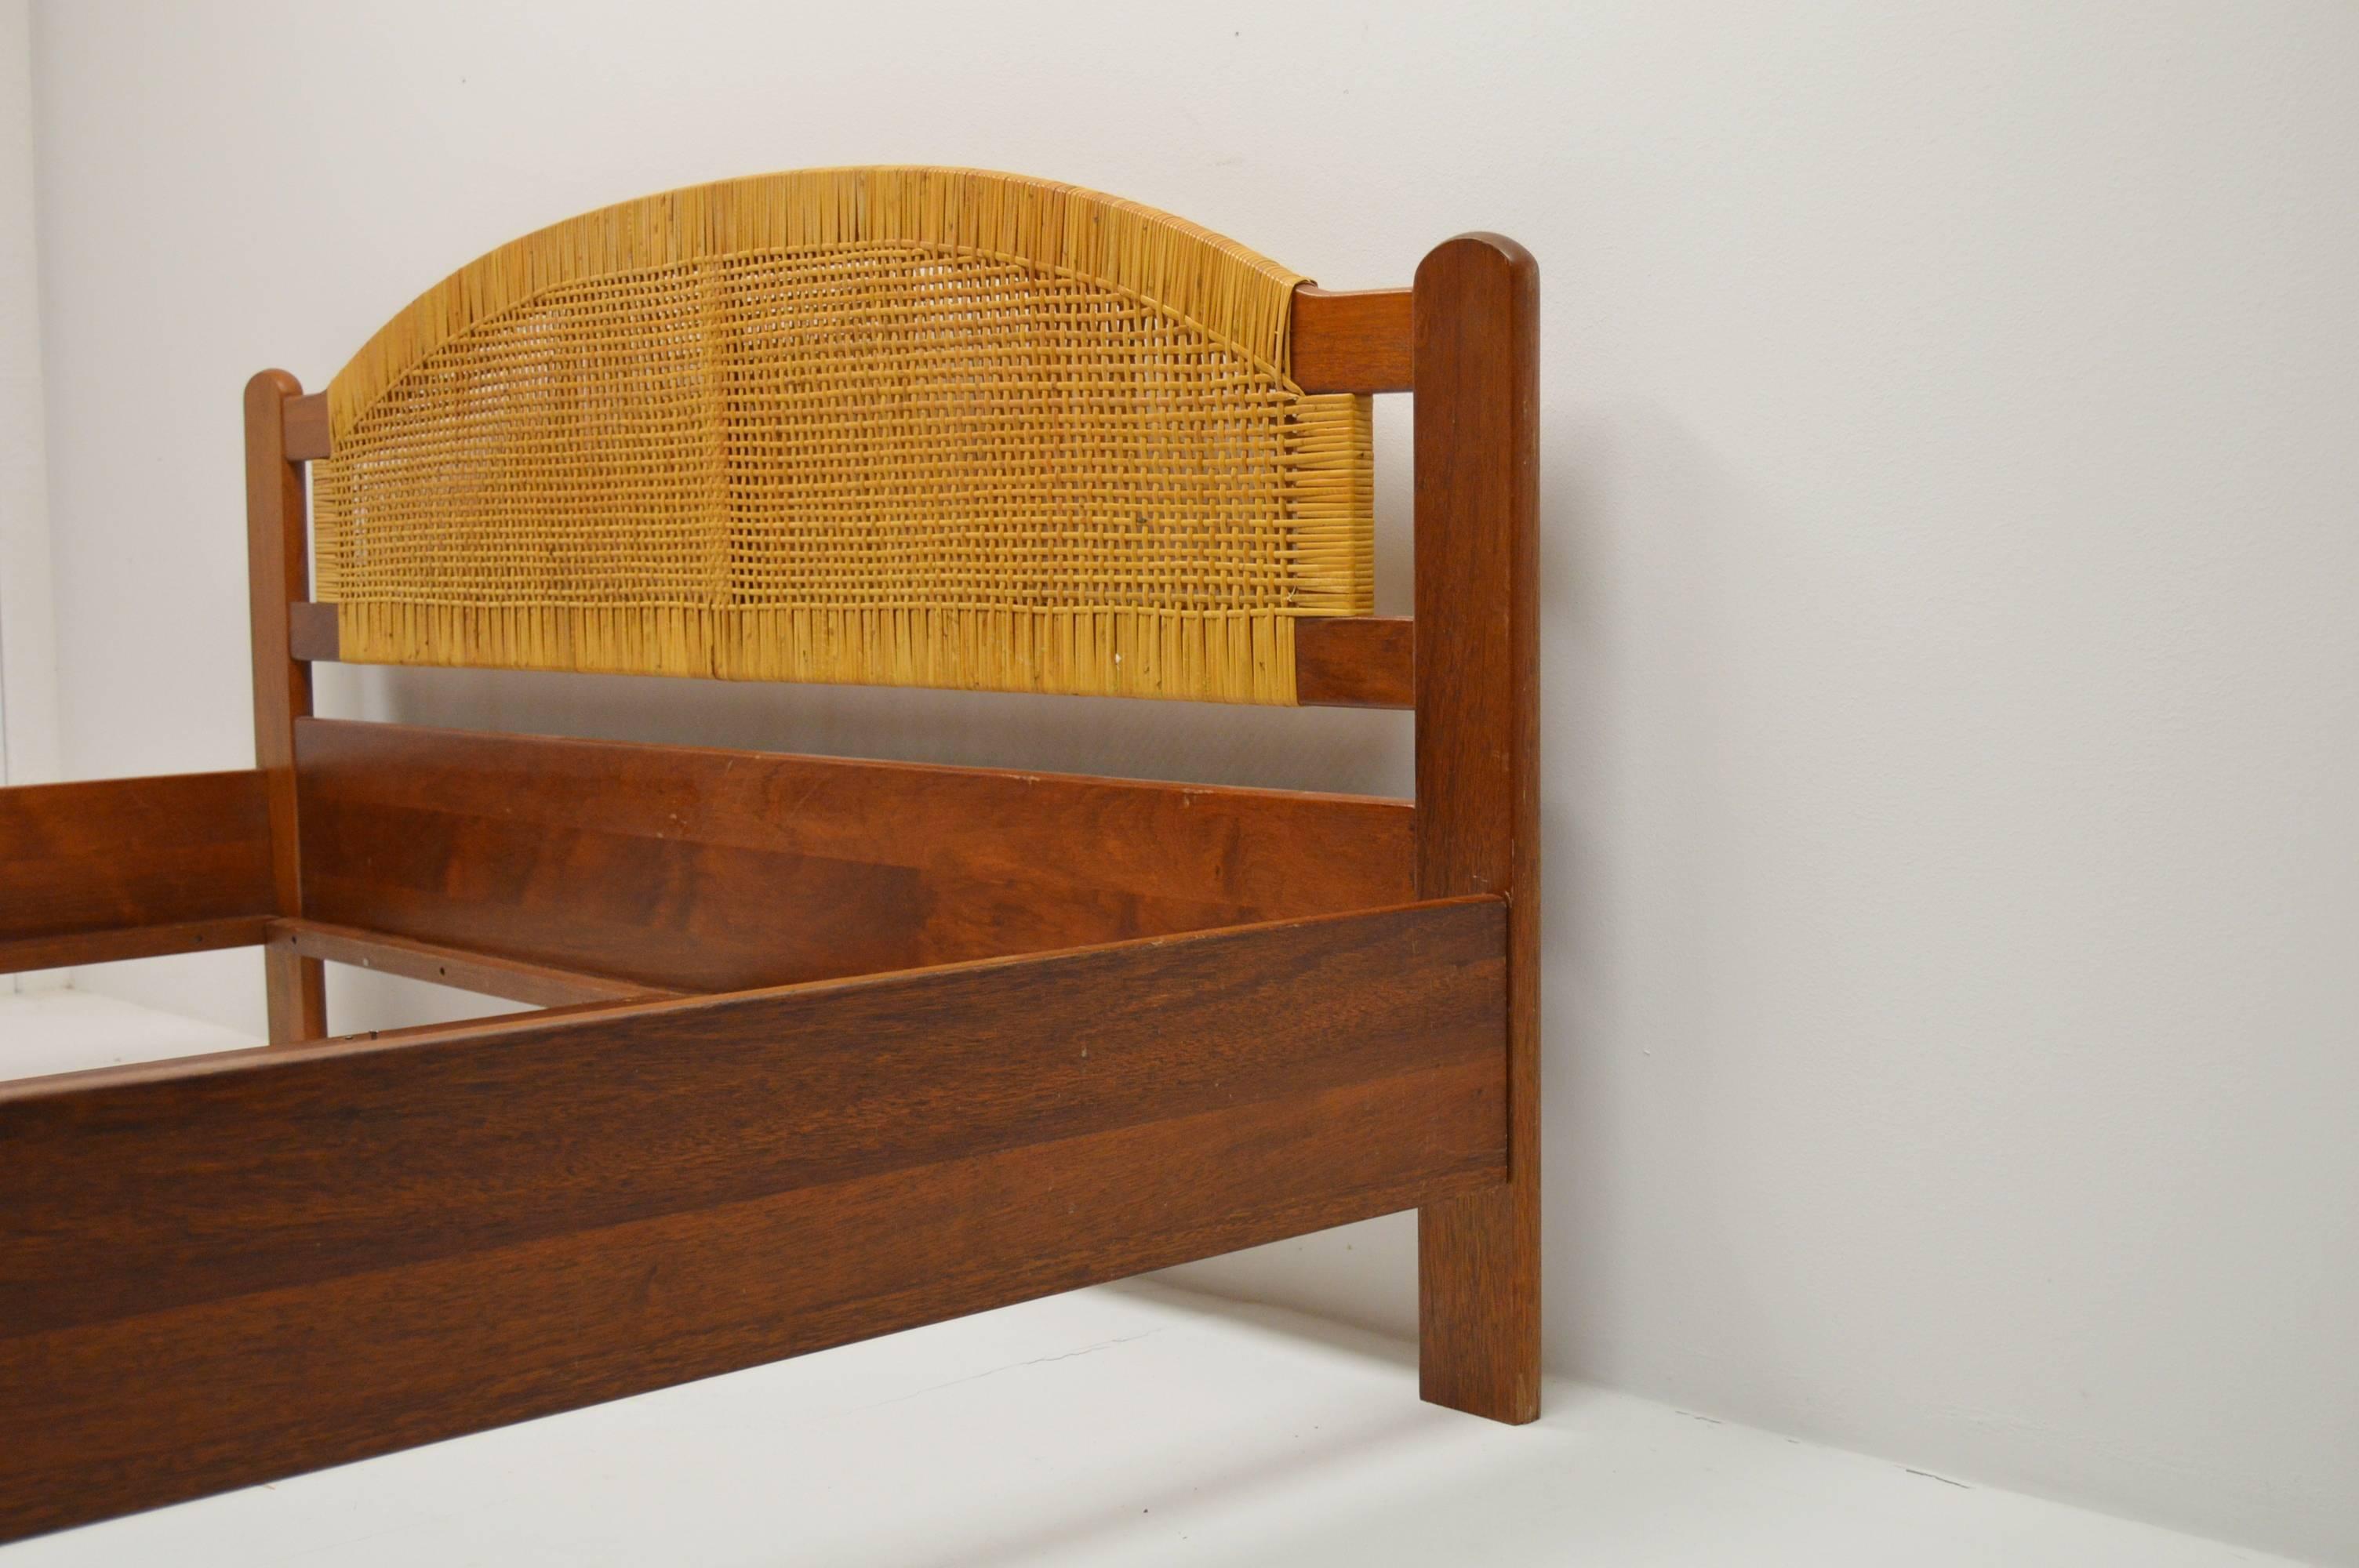 Danish Teak and Rattan Double Bedframe from circa 1960s In Excellent Condition For Sale In Alvesta, SE